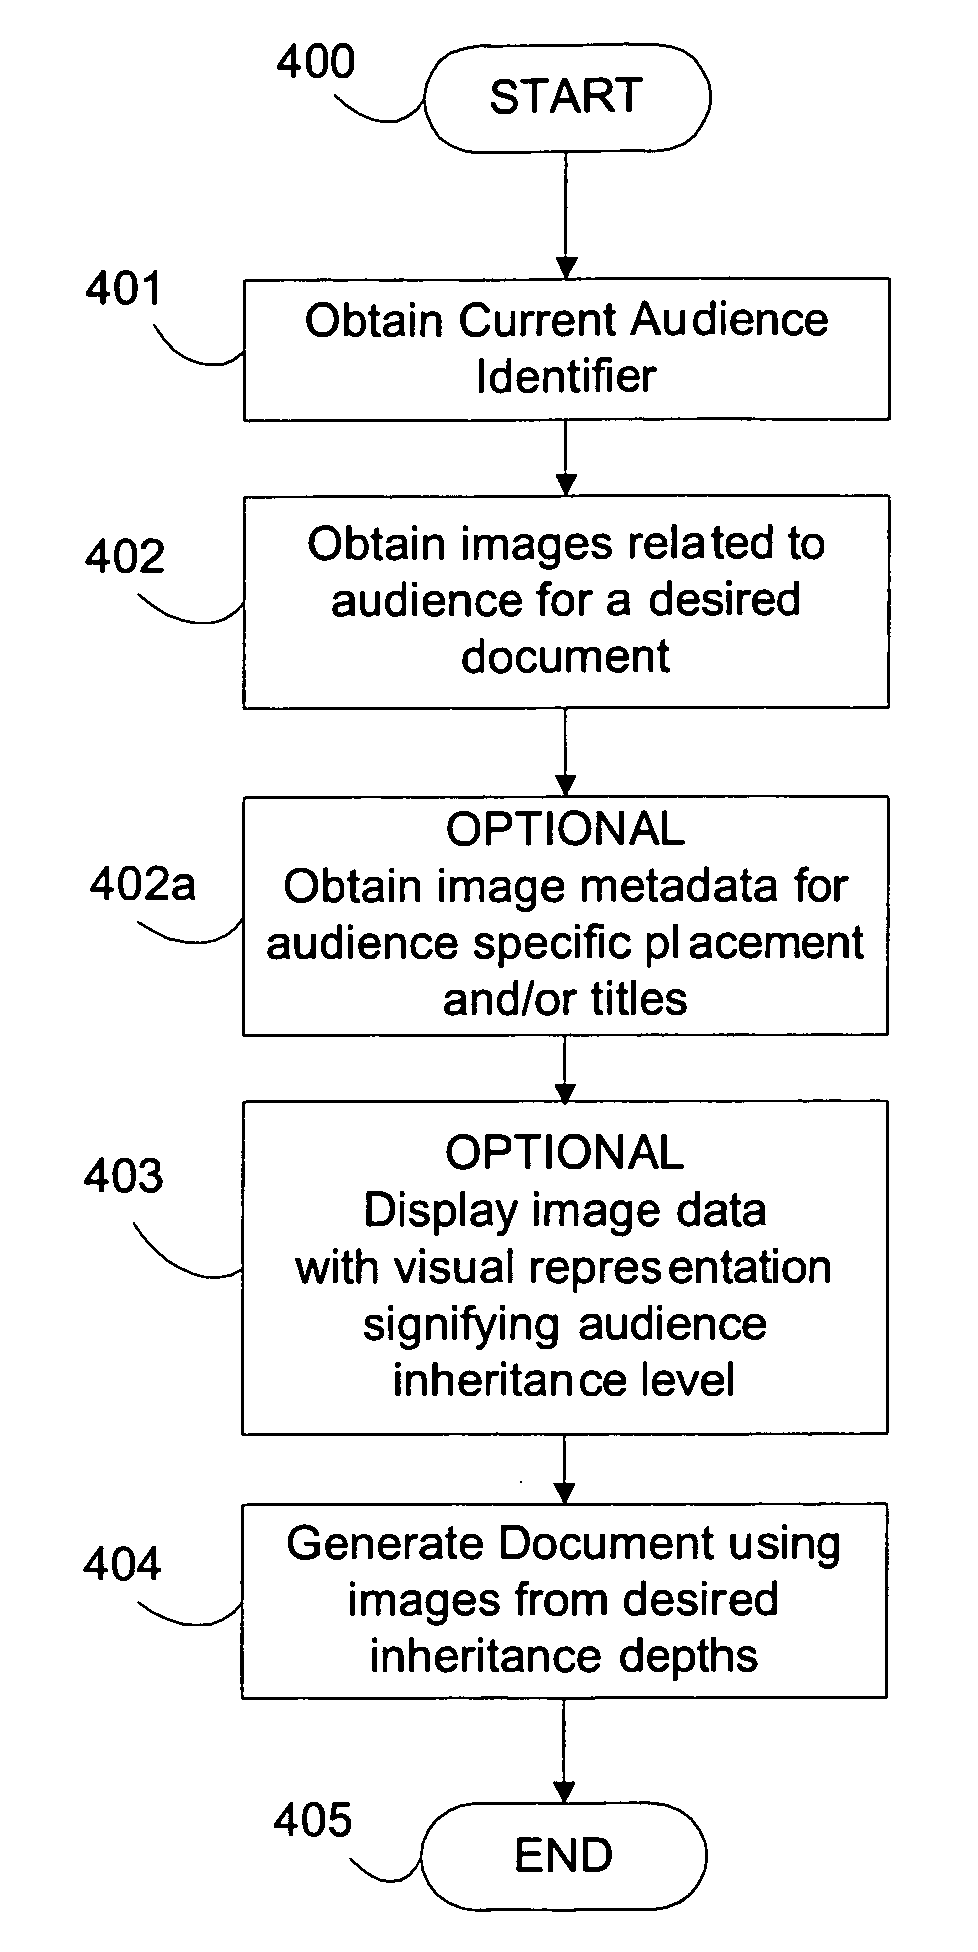 Multi-layered data model for determining image choice across a set of audience-specific documents